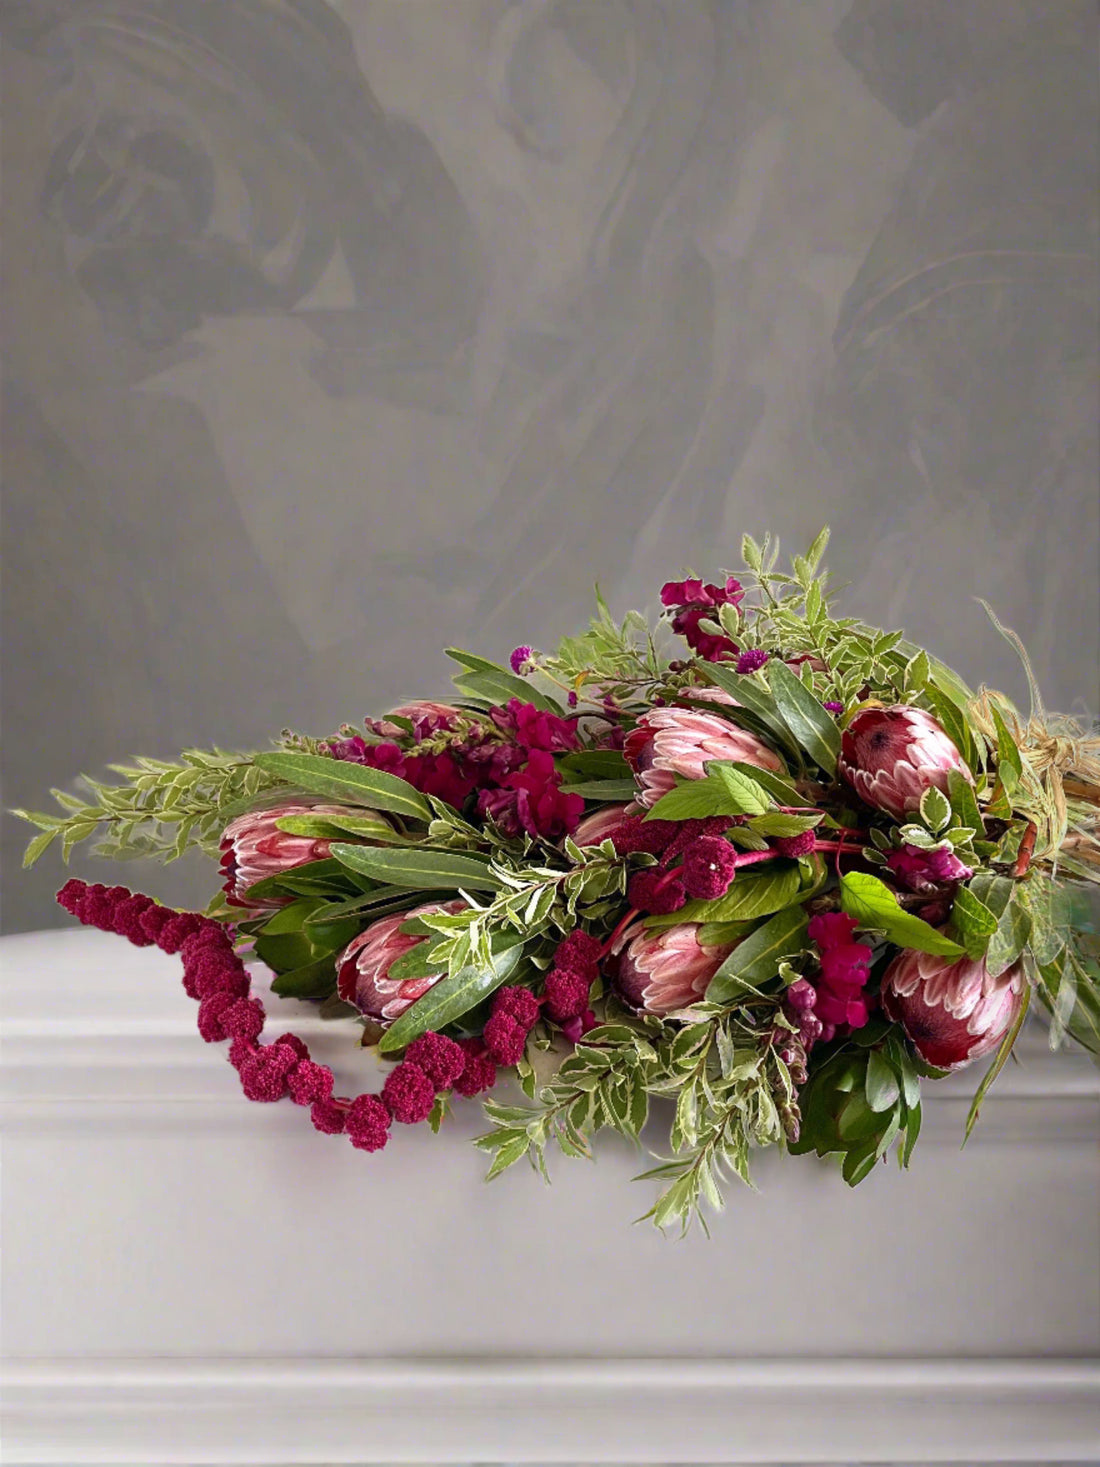 Wild Funeral Casket Sheaf with rich pink flowers and soft greenery laid atop a casket.